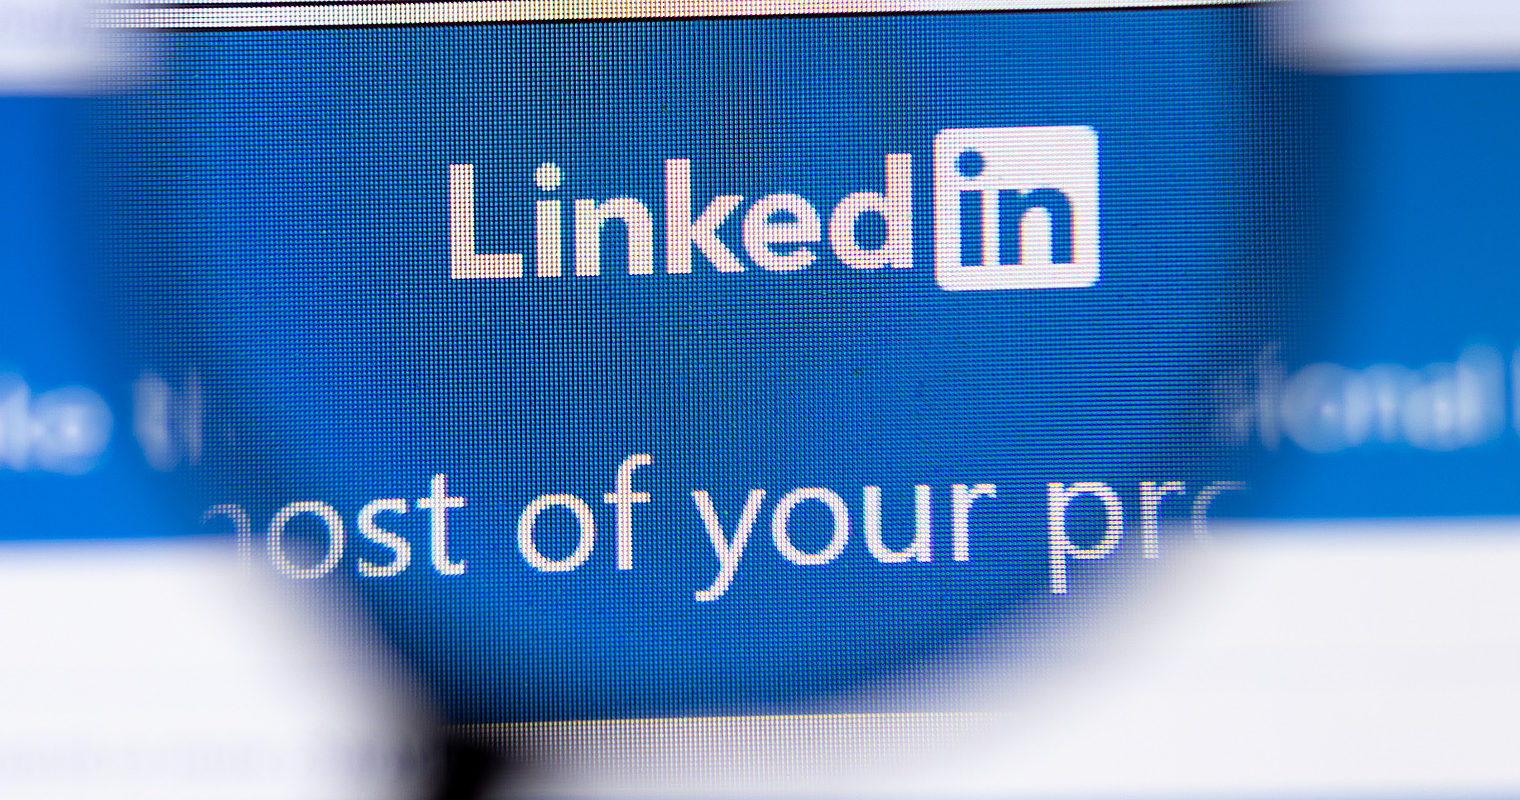 LinkedIn Launches A New Tool For Job Seekers